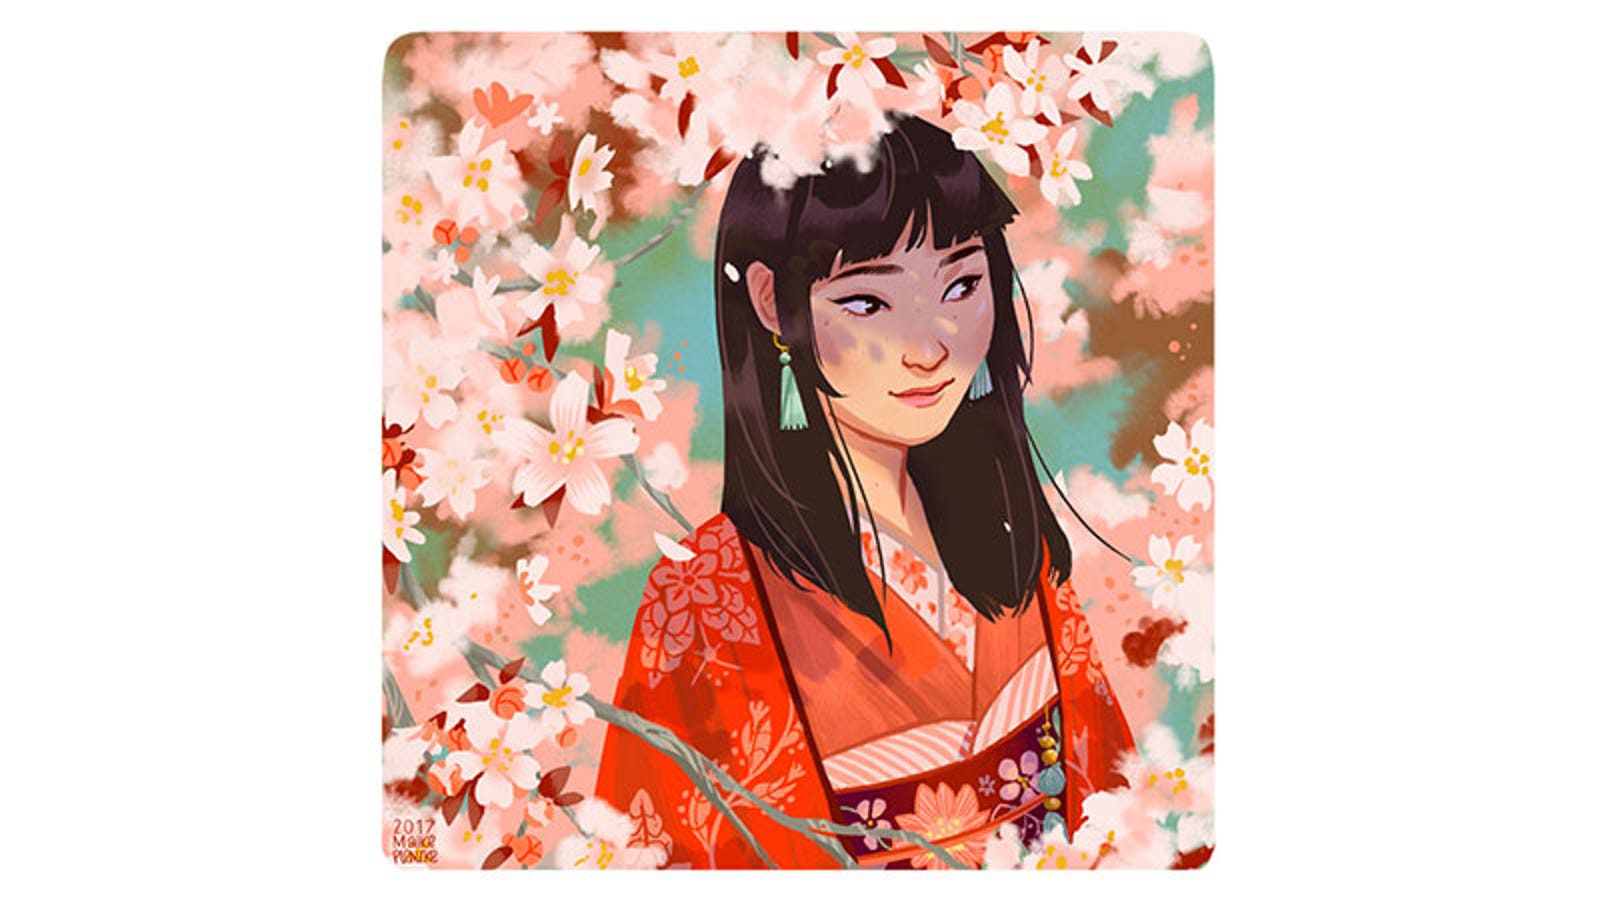 The Girl Among The Cherry Blossoms